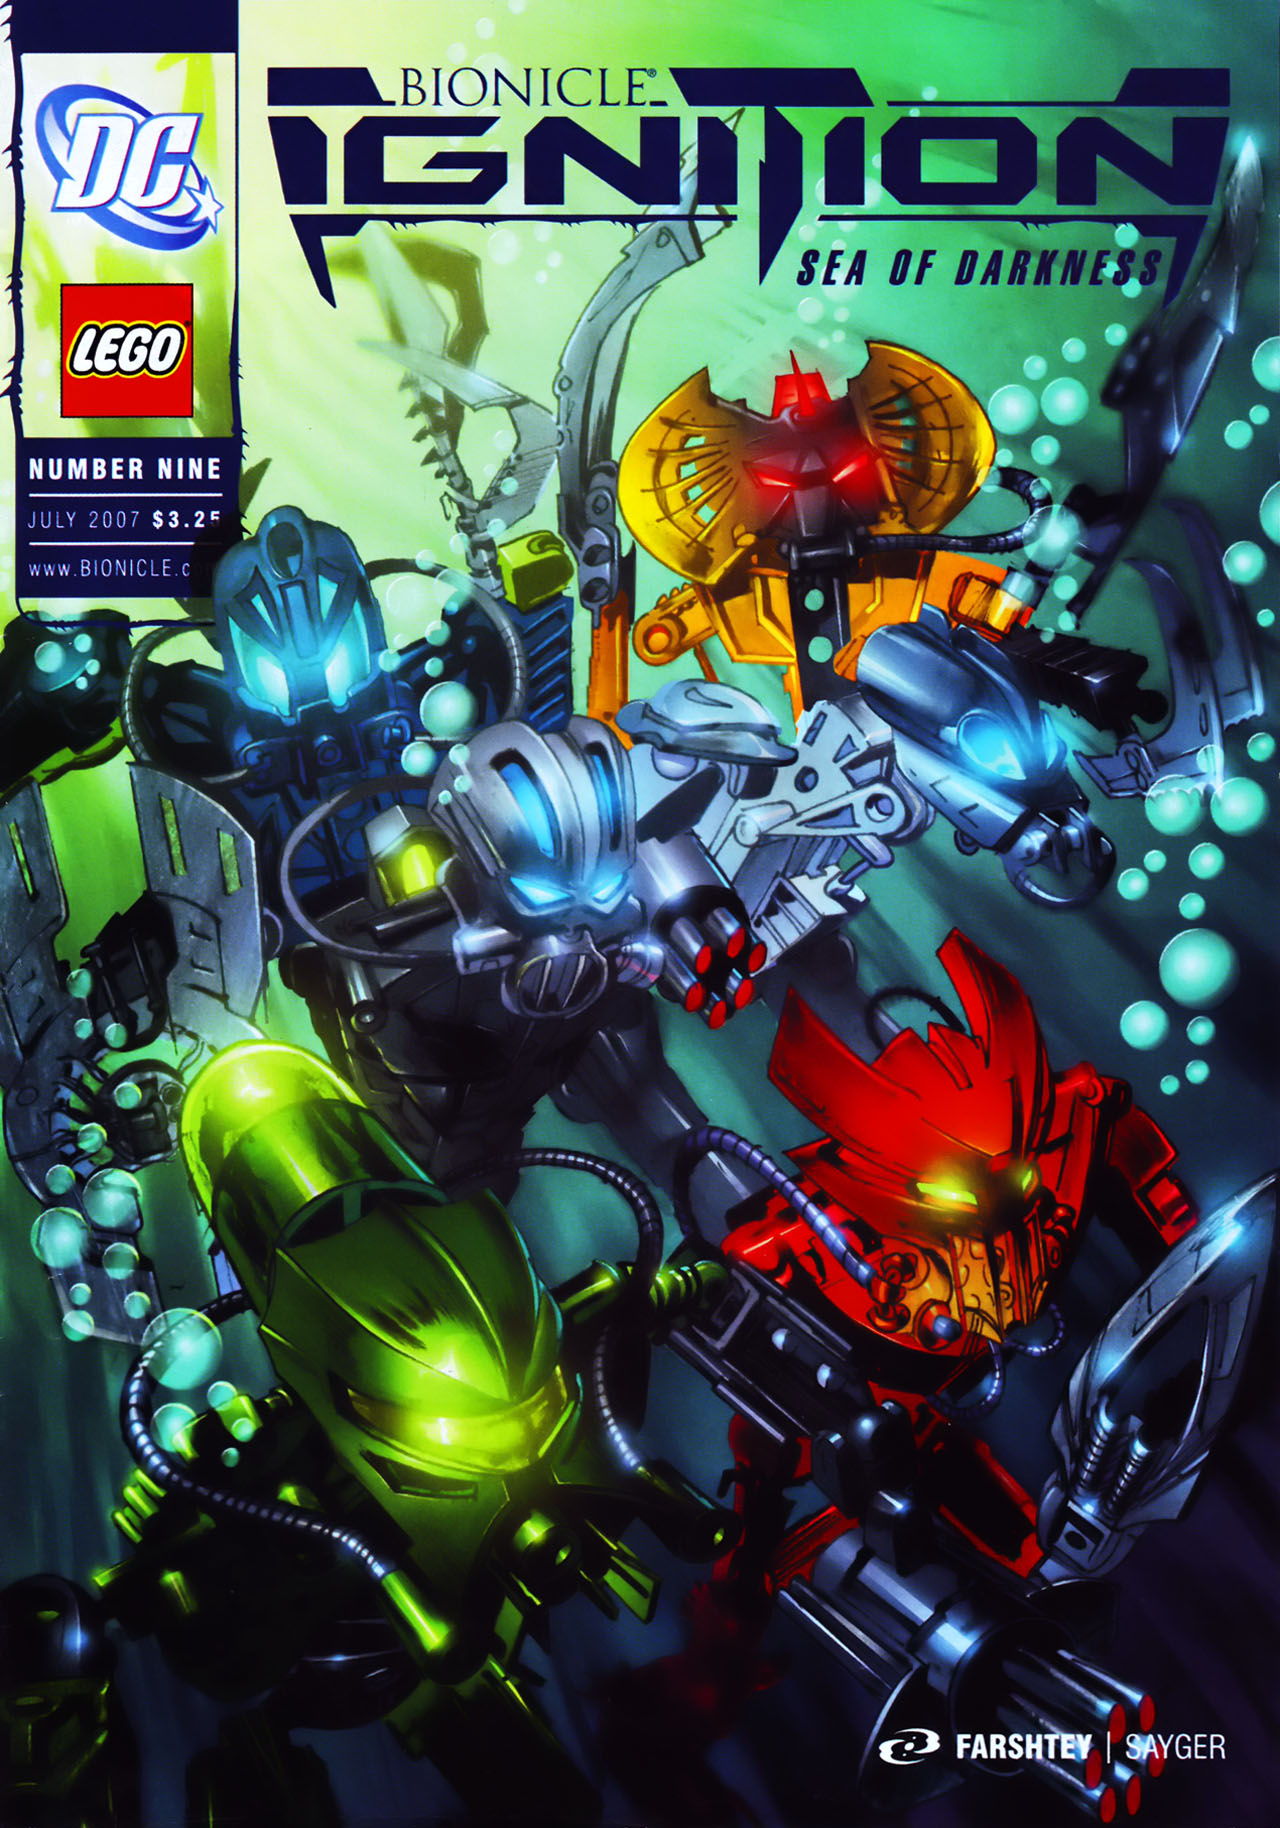 Read online Bionicle: Ignition comic -  Issue #9 - 1